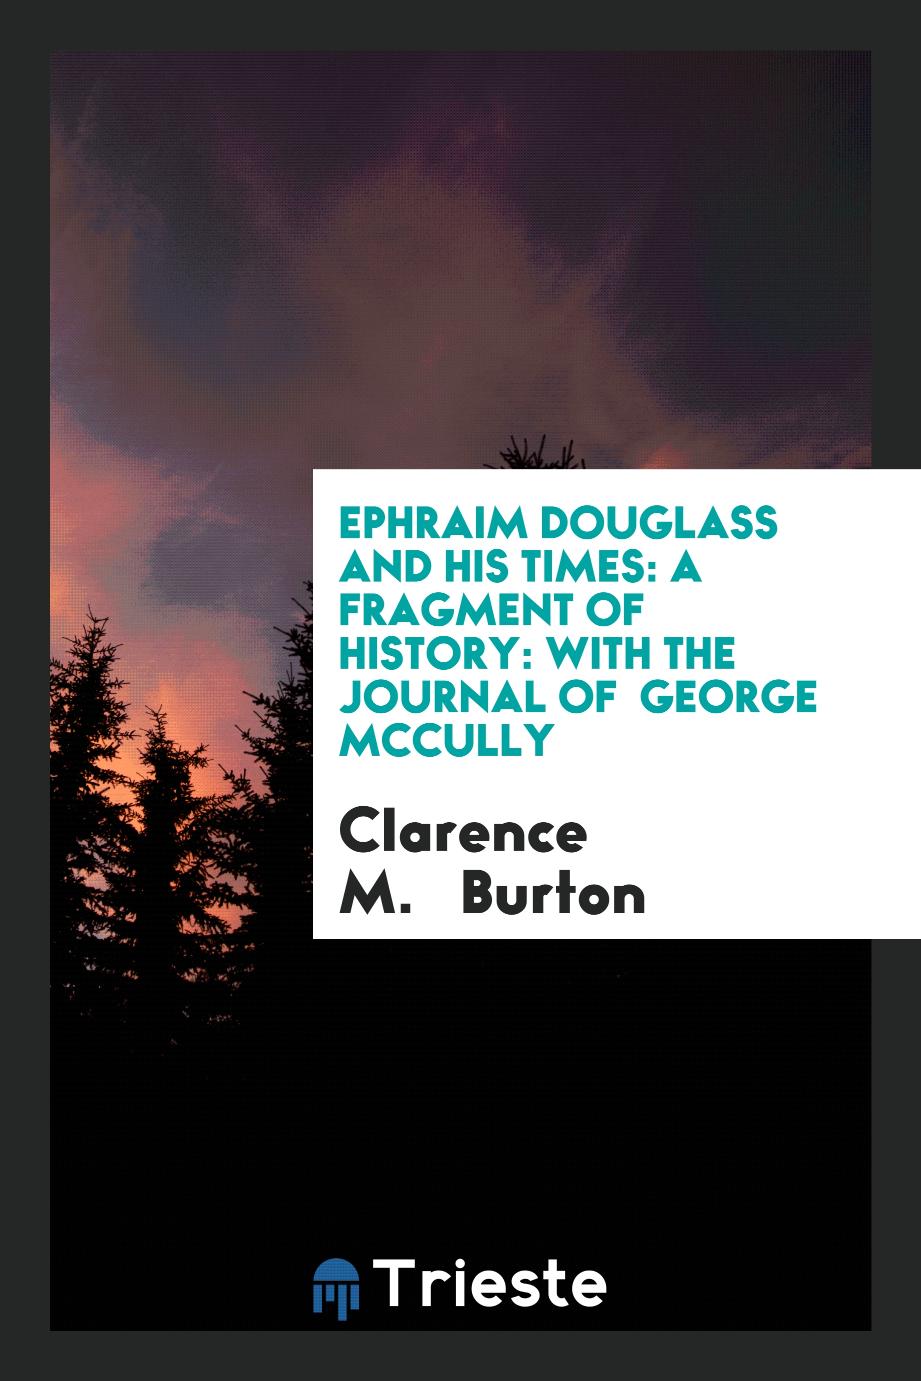 Ephraim Douglass and His Times: A Fragment of History: with the Journal of George McCully